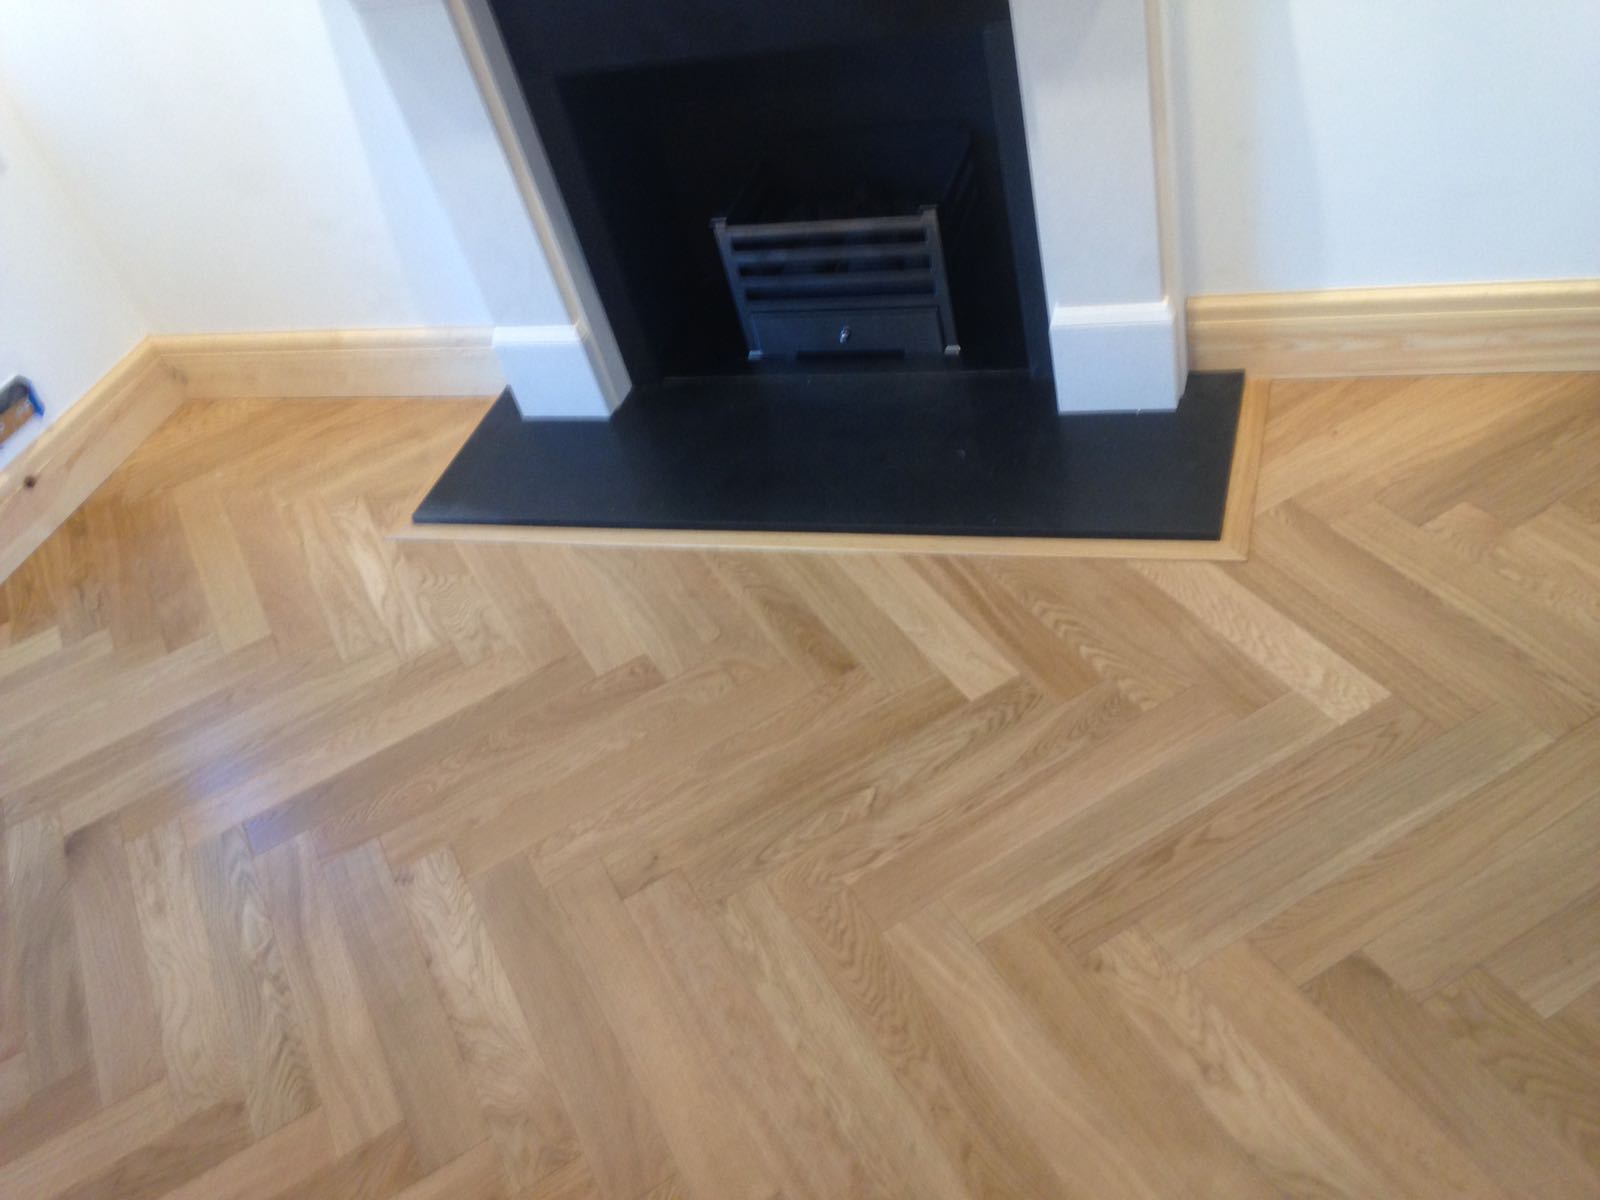 Is Parquet Flooring The Number One, Is Parquet Flooring Out Of Style